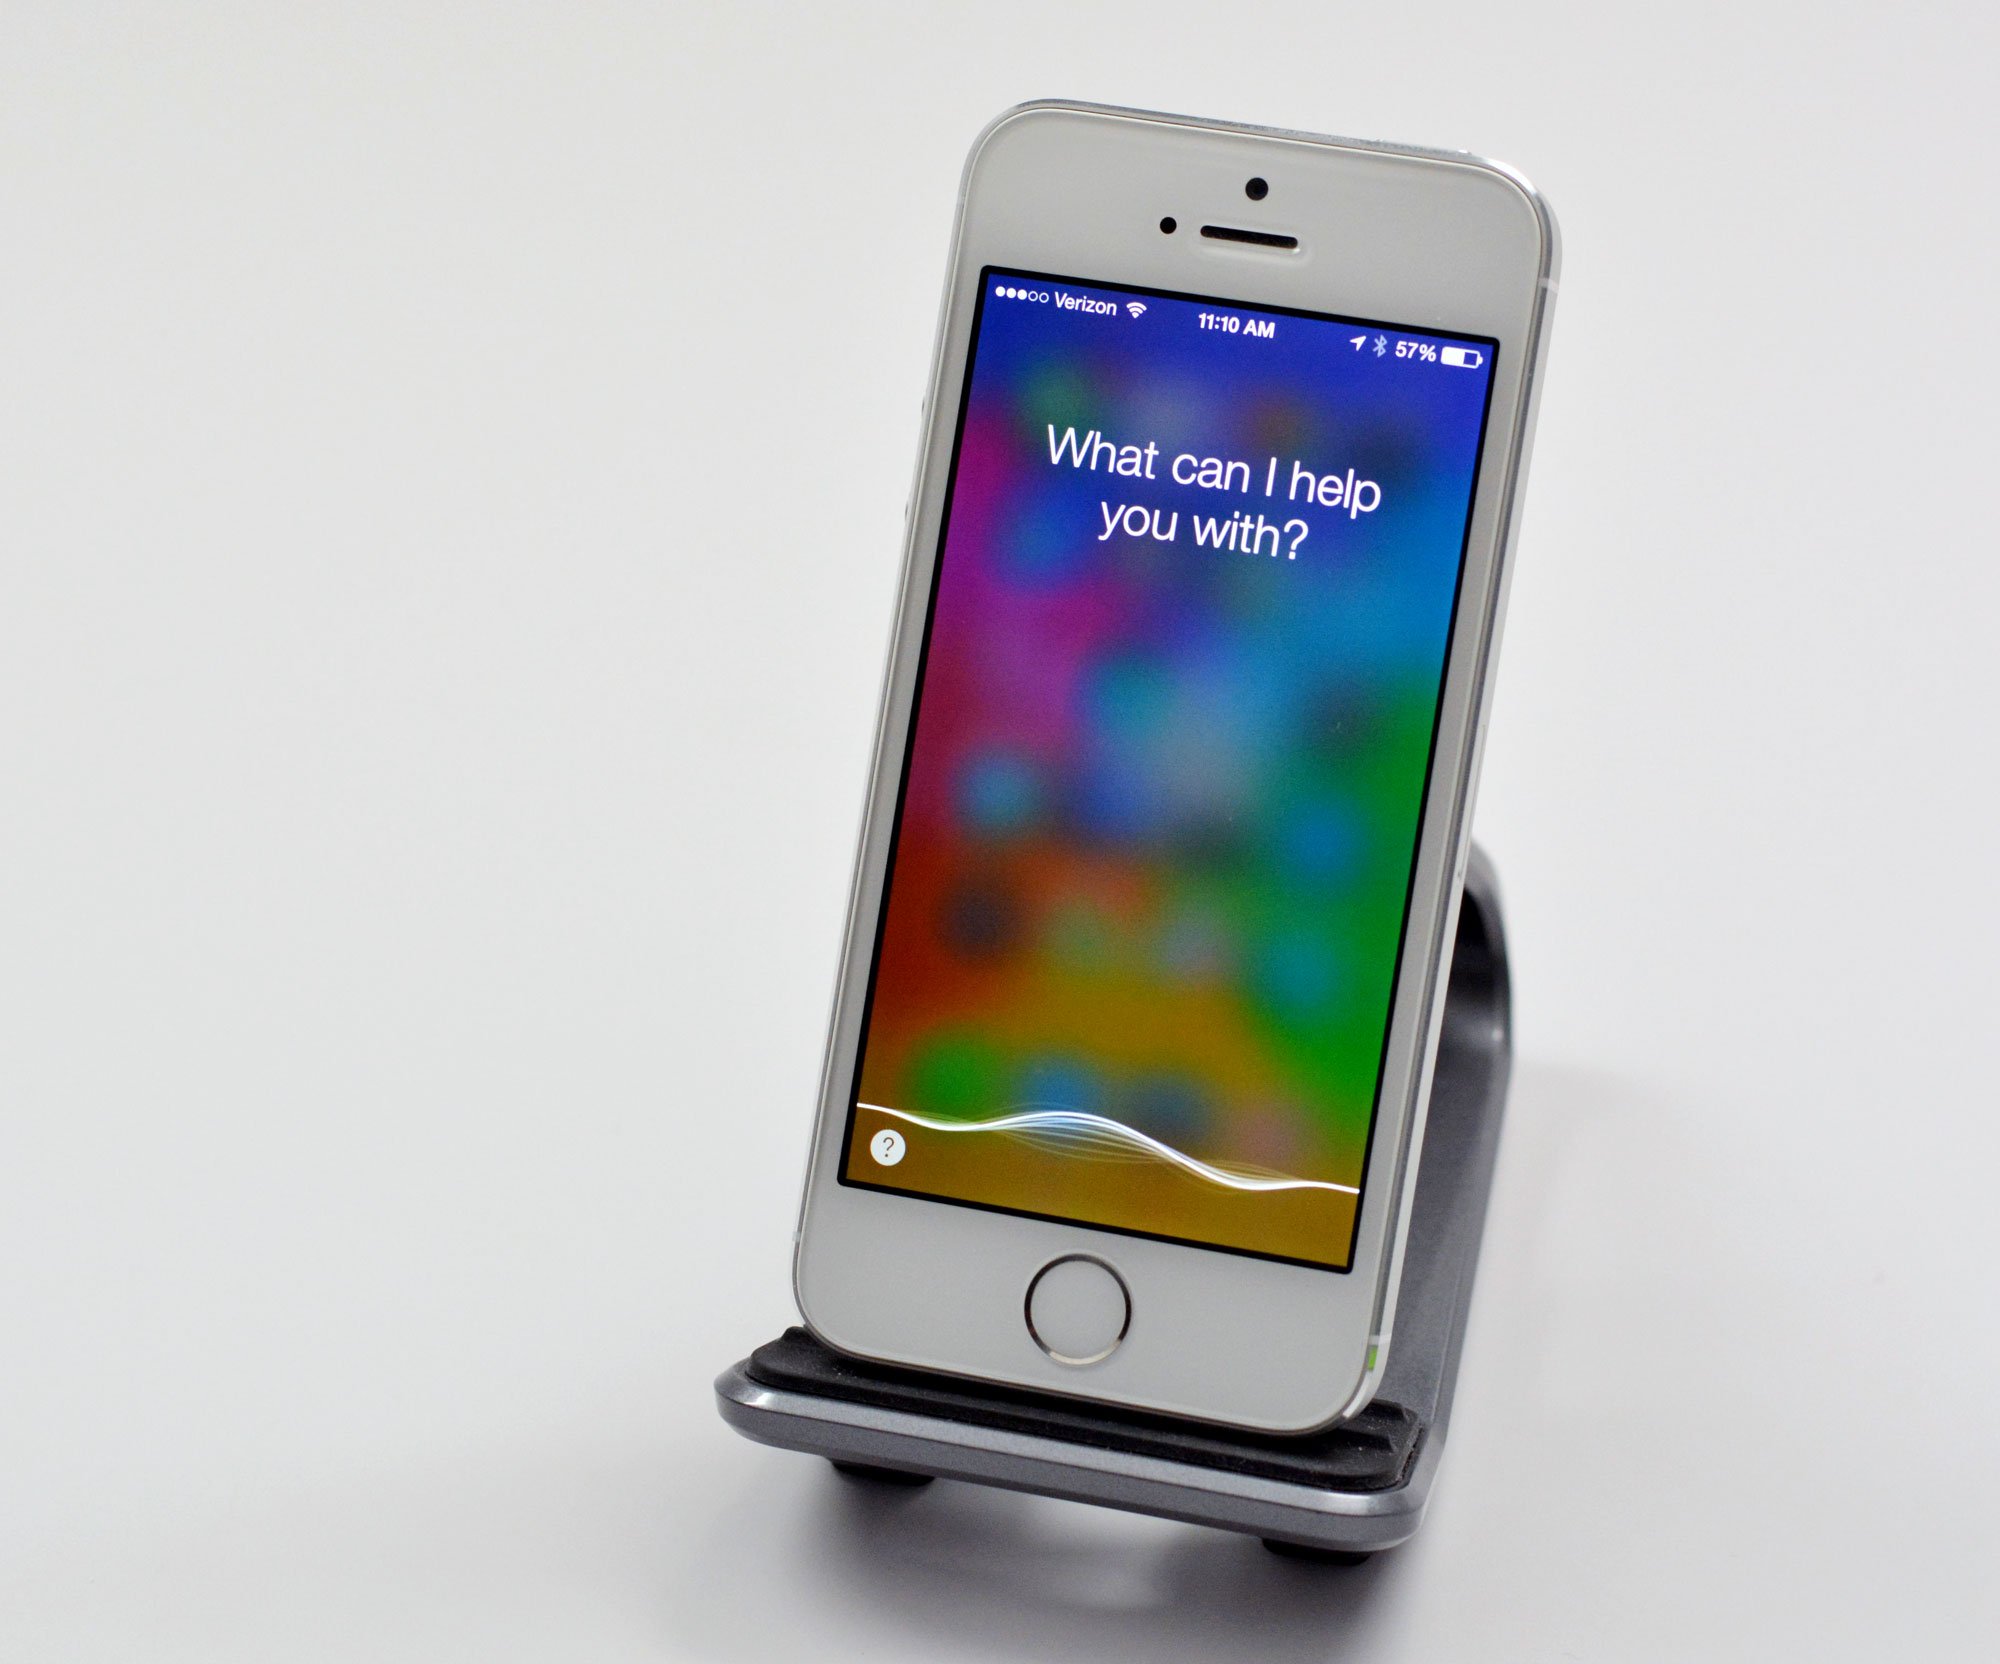 The iOS 7.1 update adds some new features and fixes several bugs.